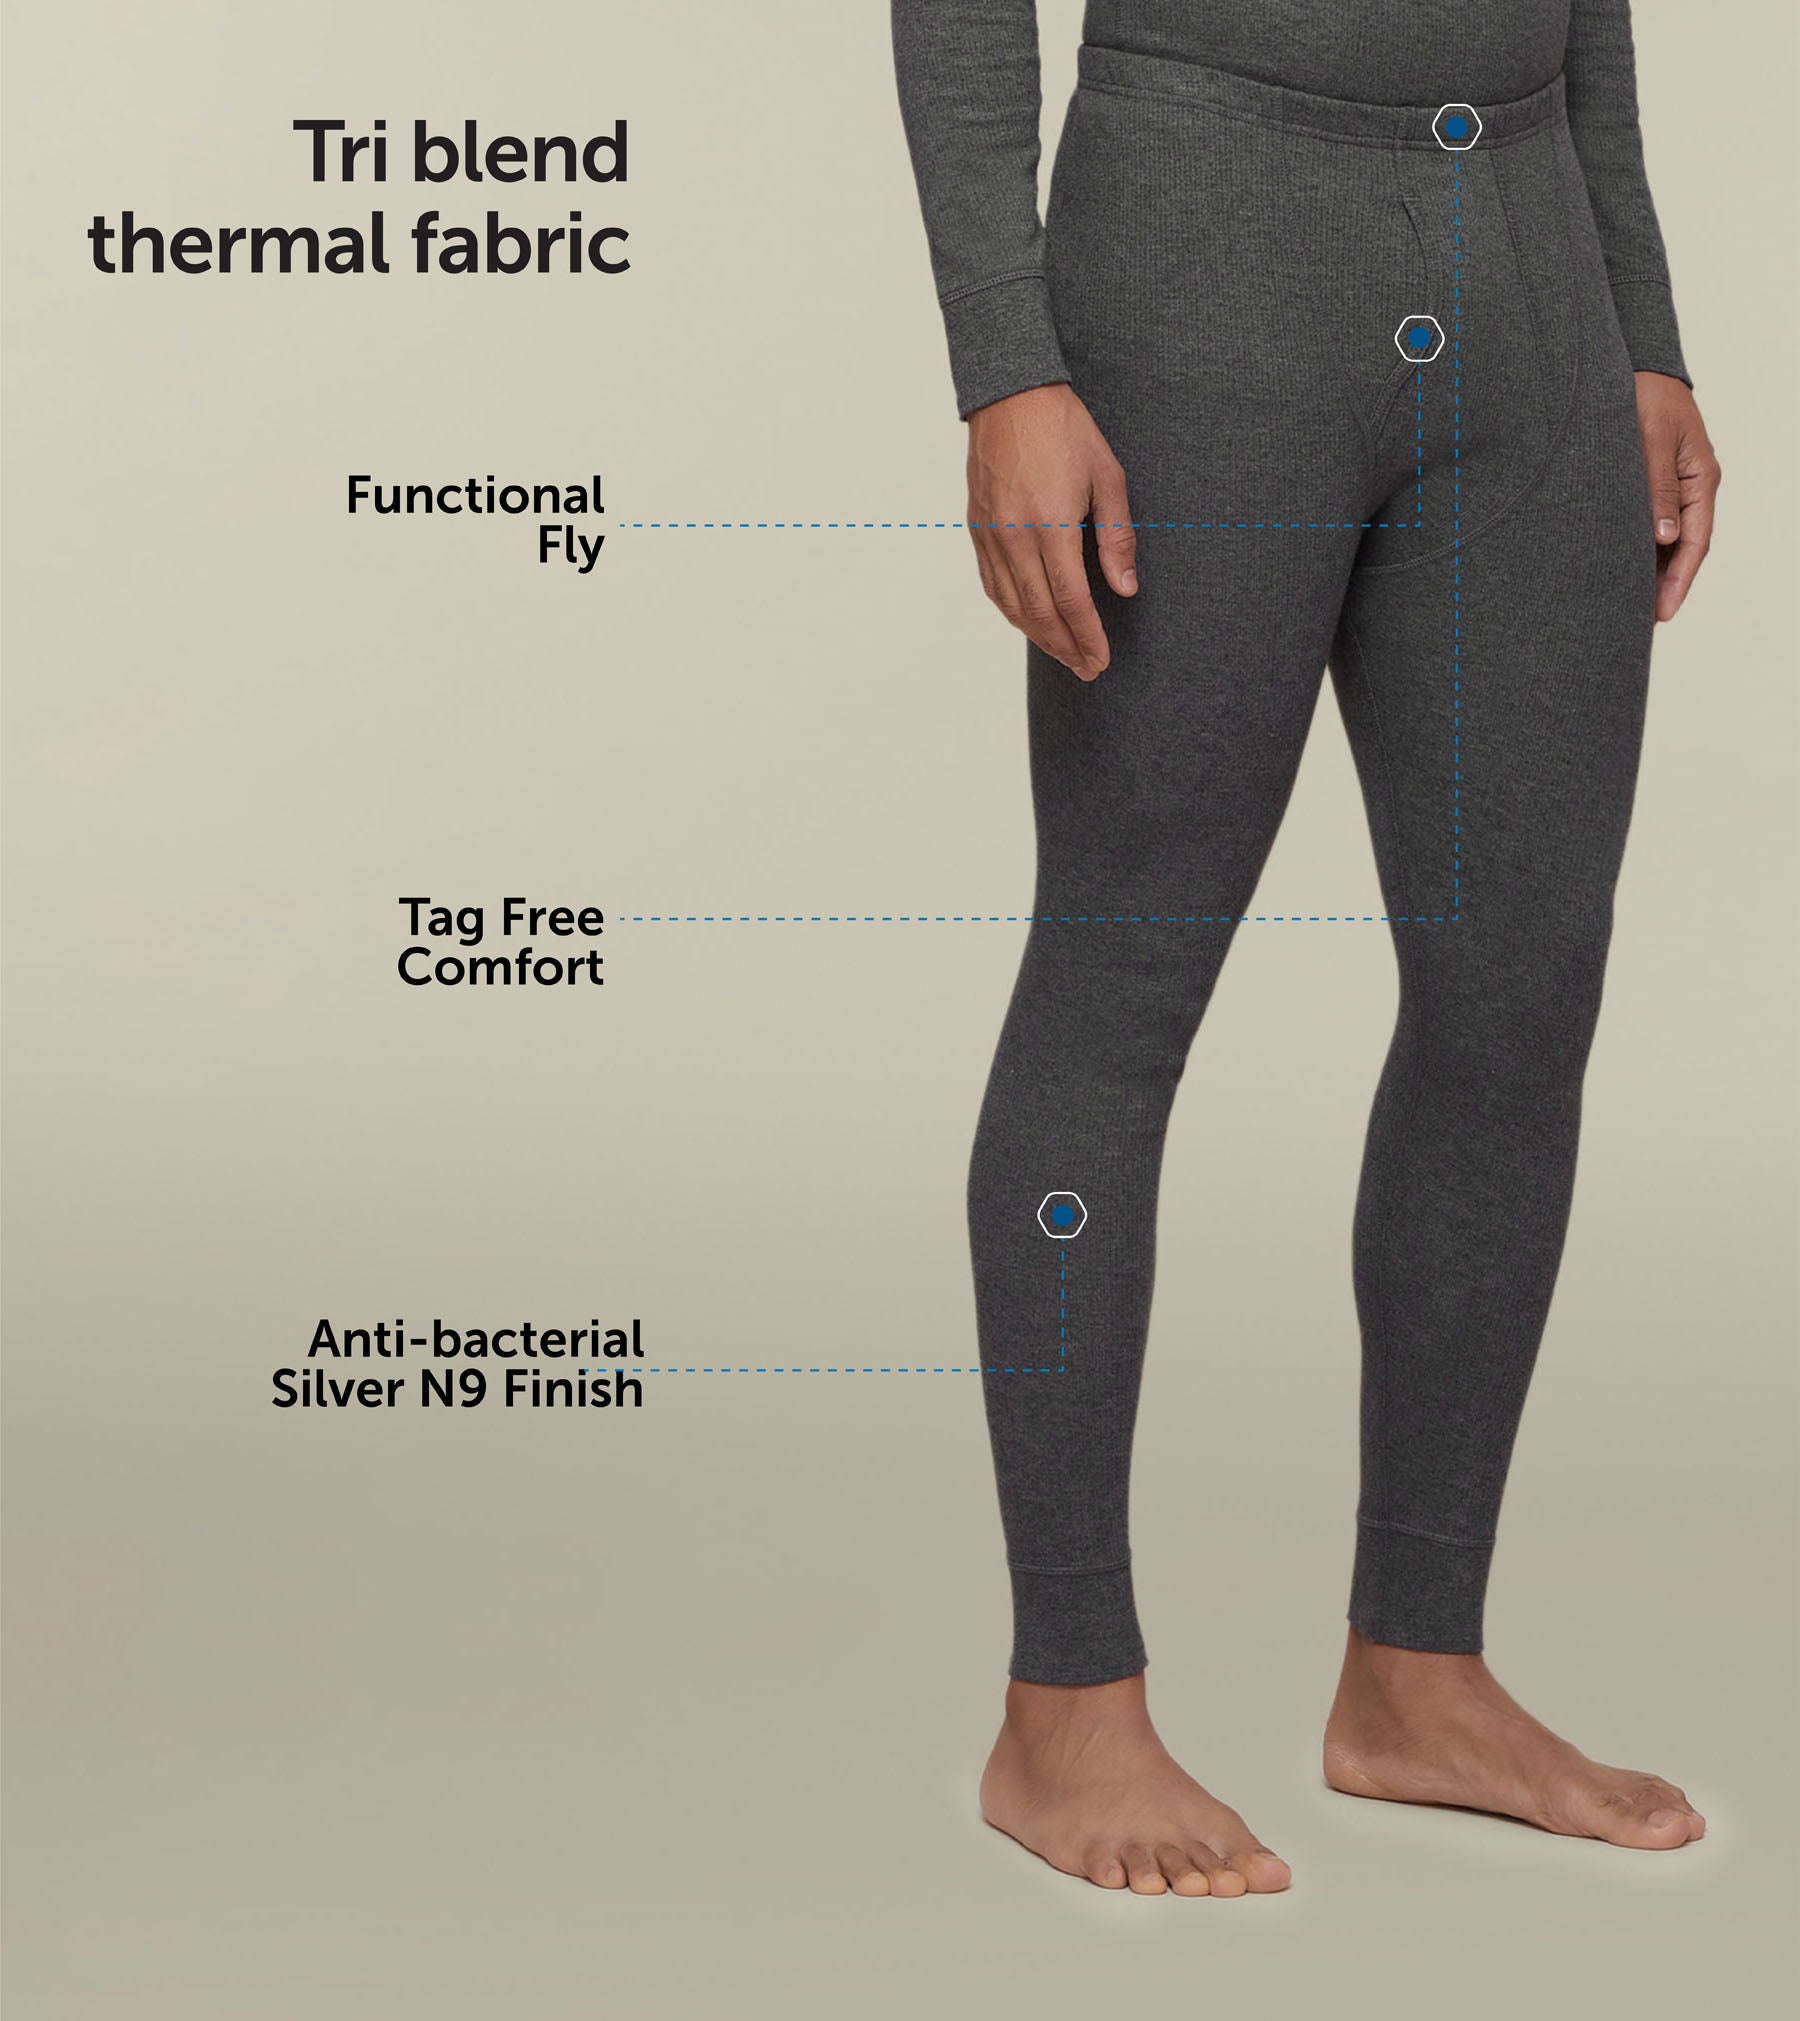 Cotton Rich Thermal Long Johns For Men Graphite Grey - XYXX Mens Apparels